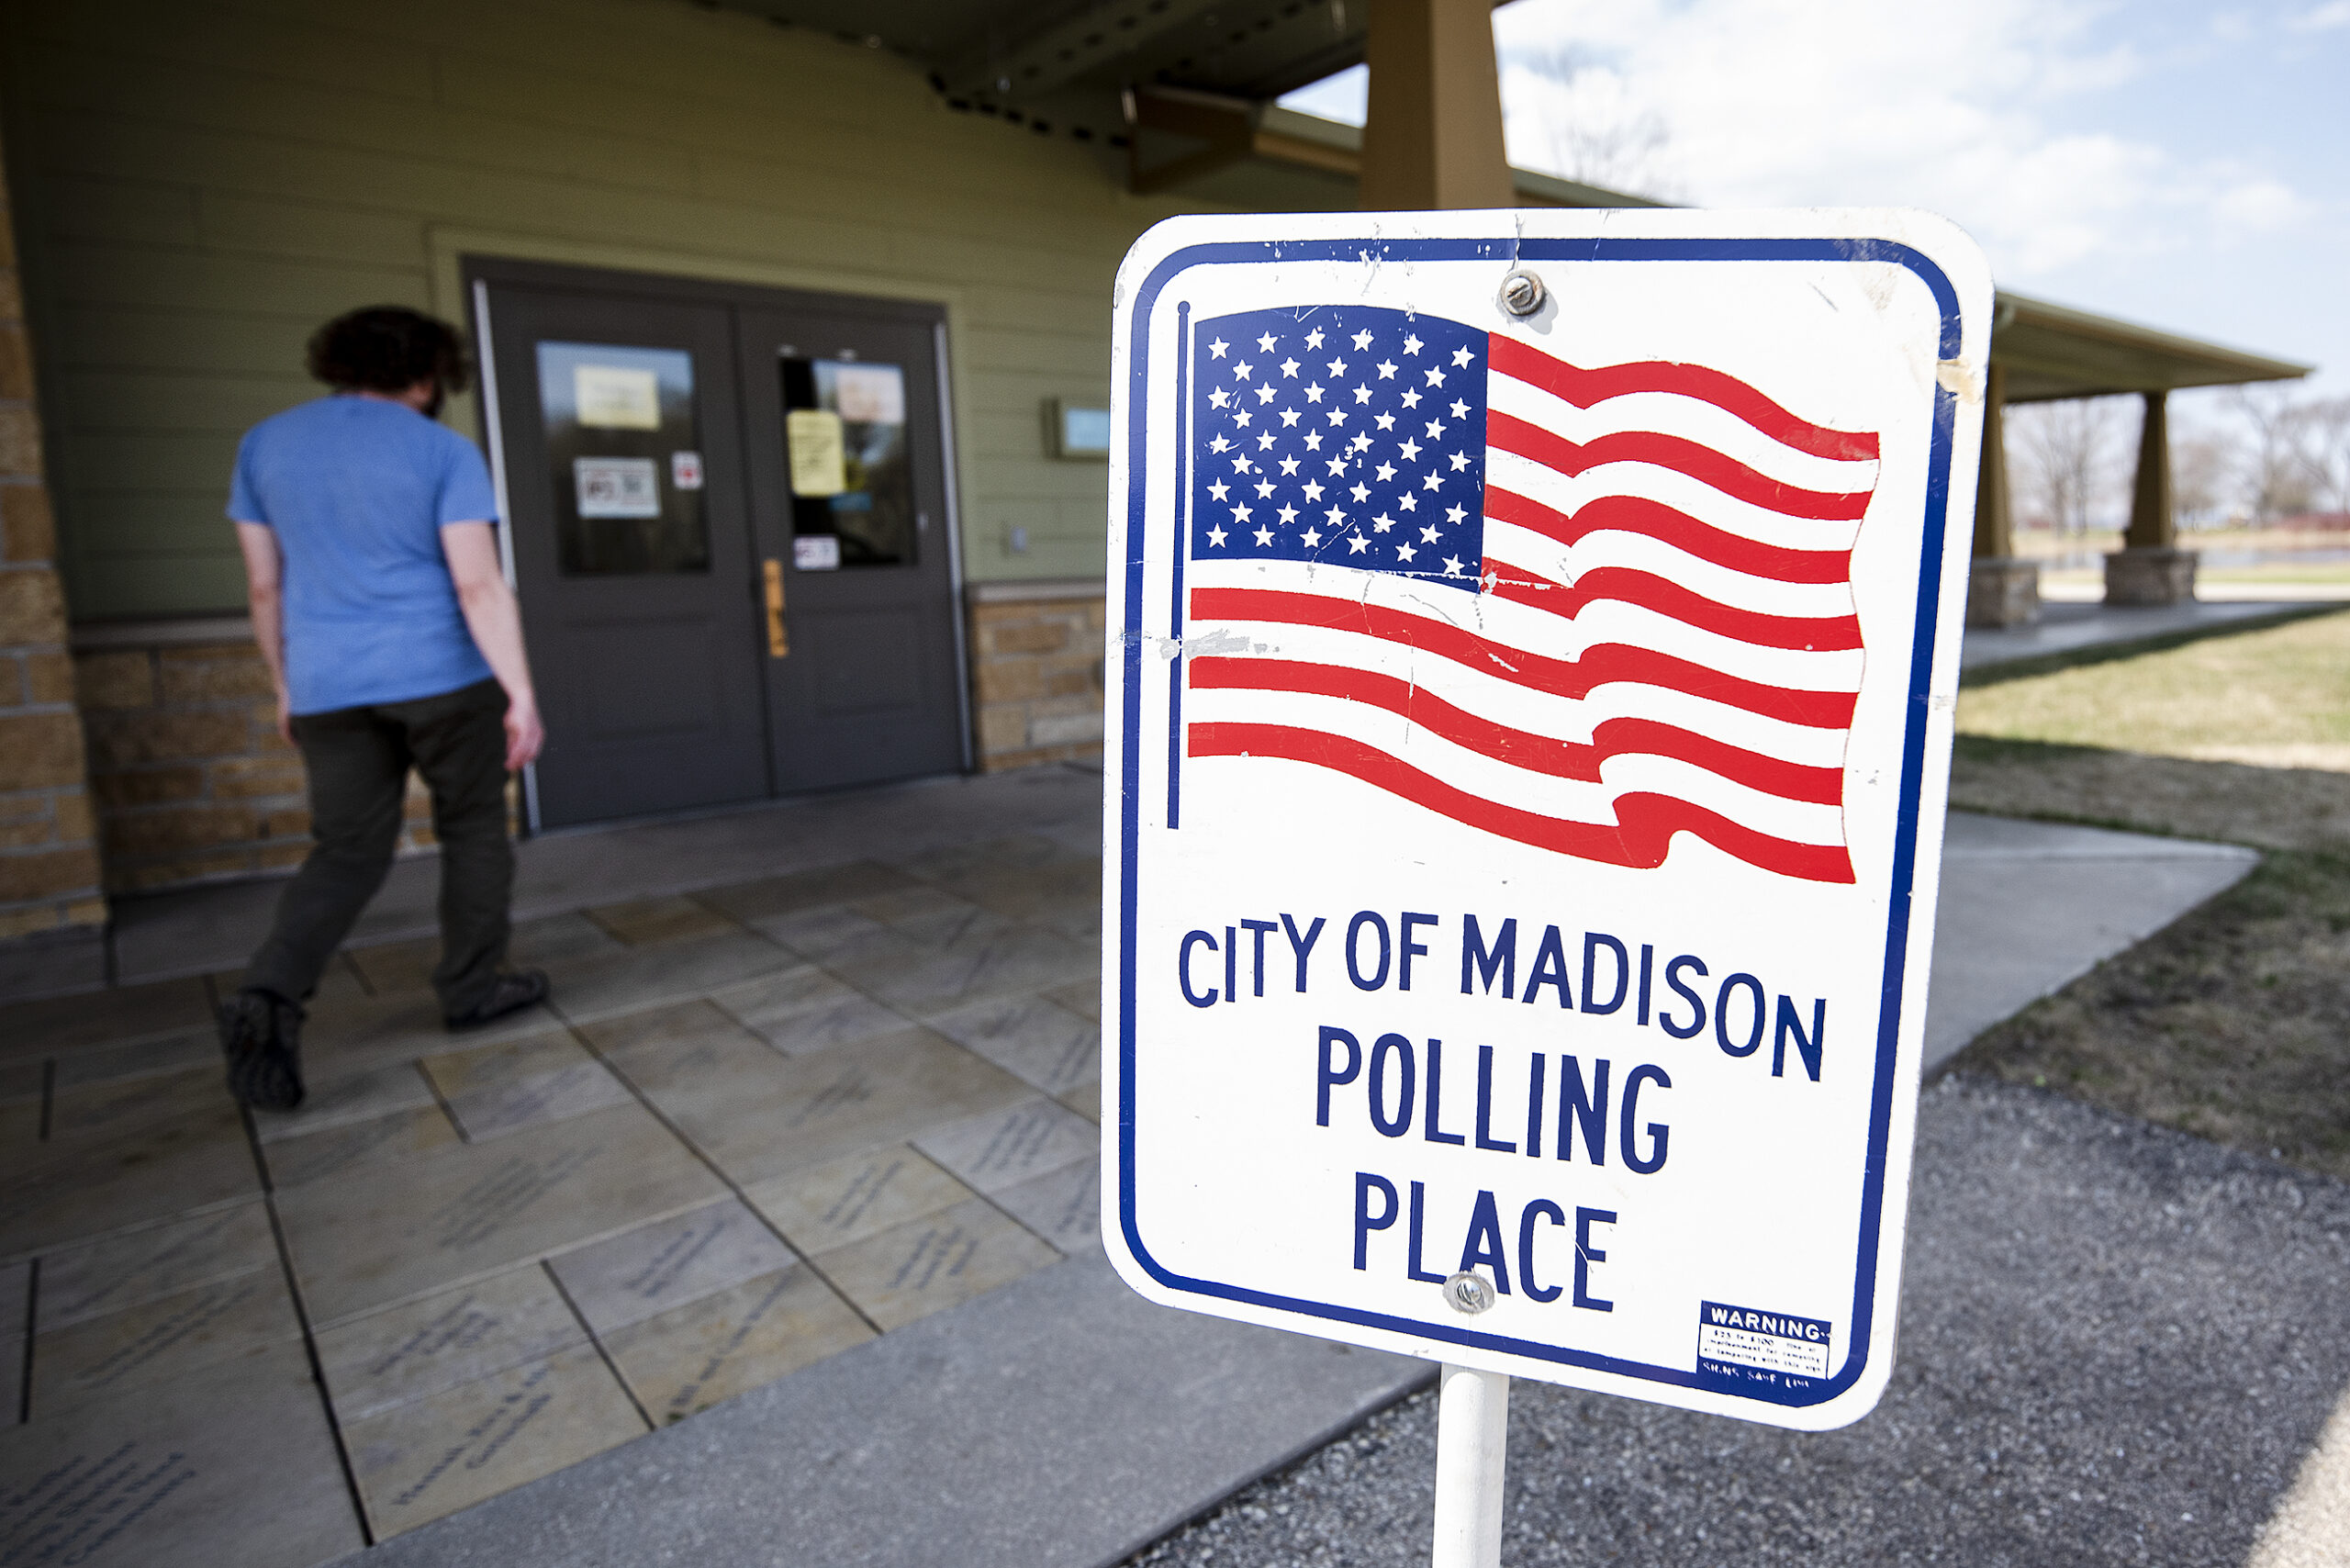 A sign with a U.S. flag says "City of Madison Polling Place."